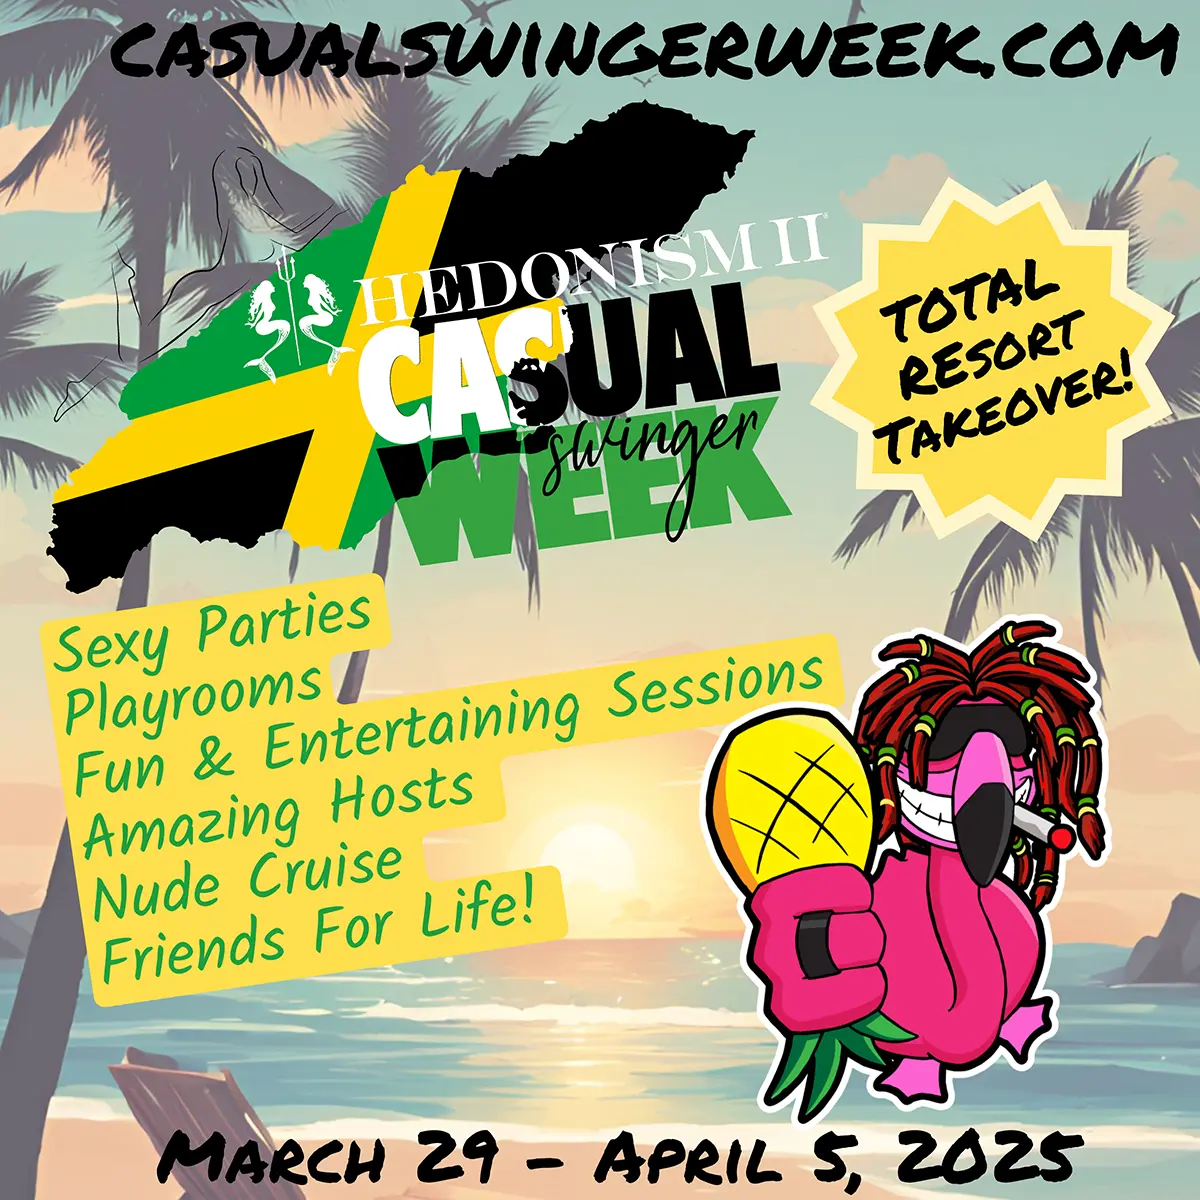 Group Event - Casual Swinger Week - March 29 - April 5, 2025 - Hedonism II Resort, Negril Jamaica